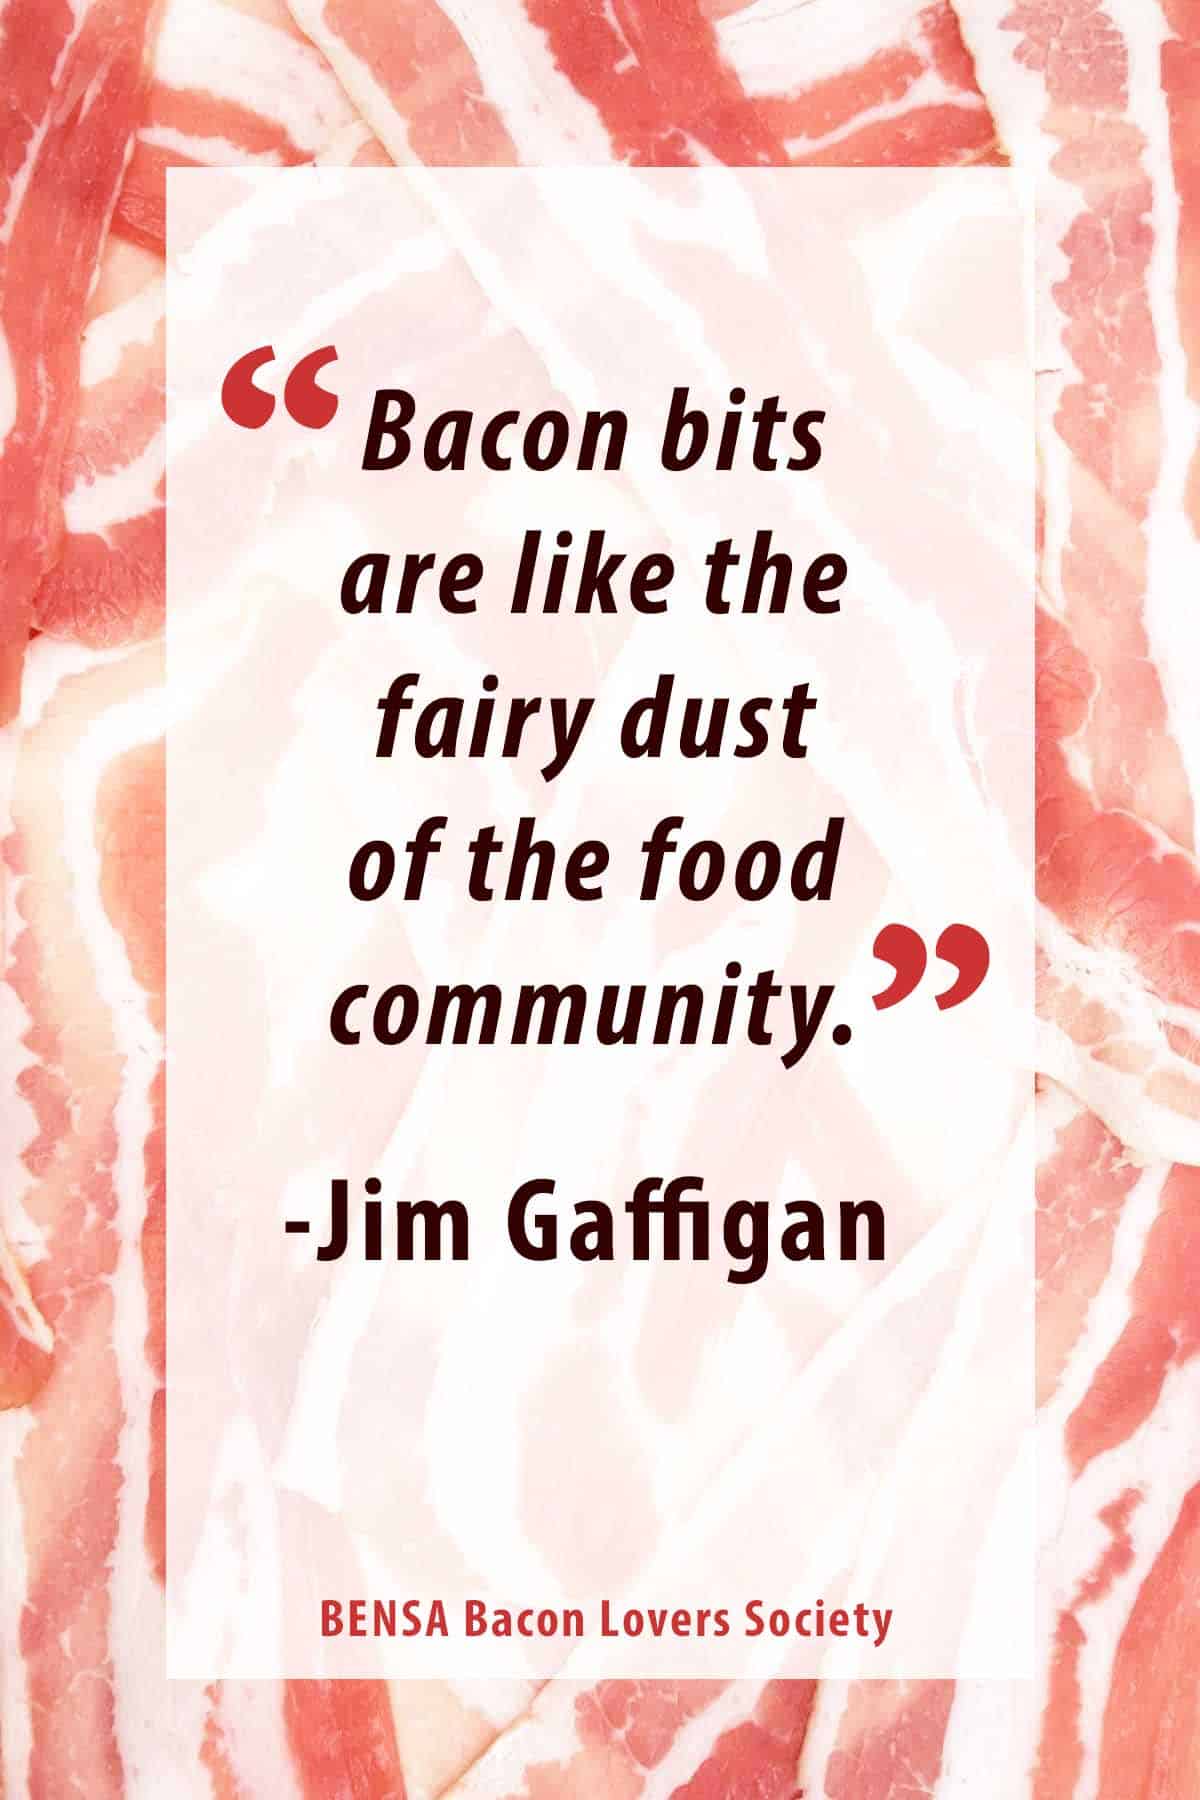 Pinterest pin with quote: "Bacon bits are like the fairy dust of the food community." - Jim Gaffigan